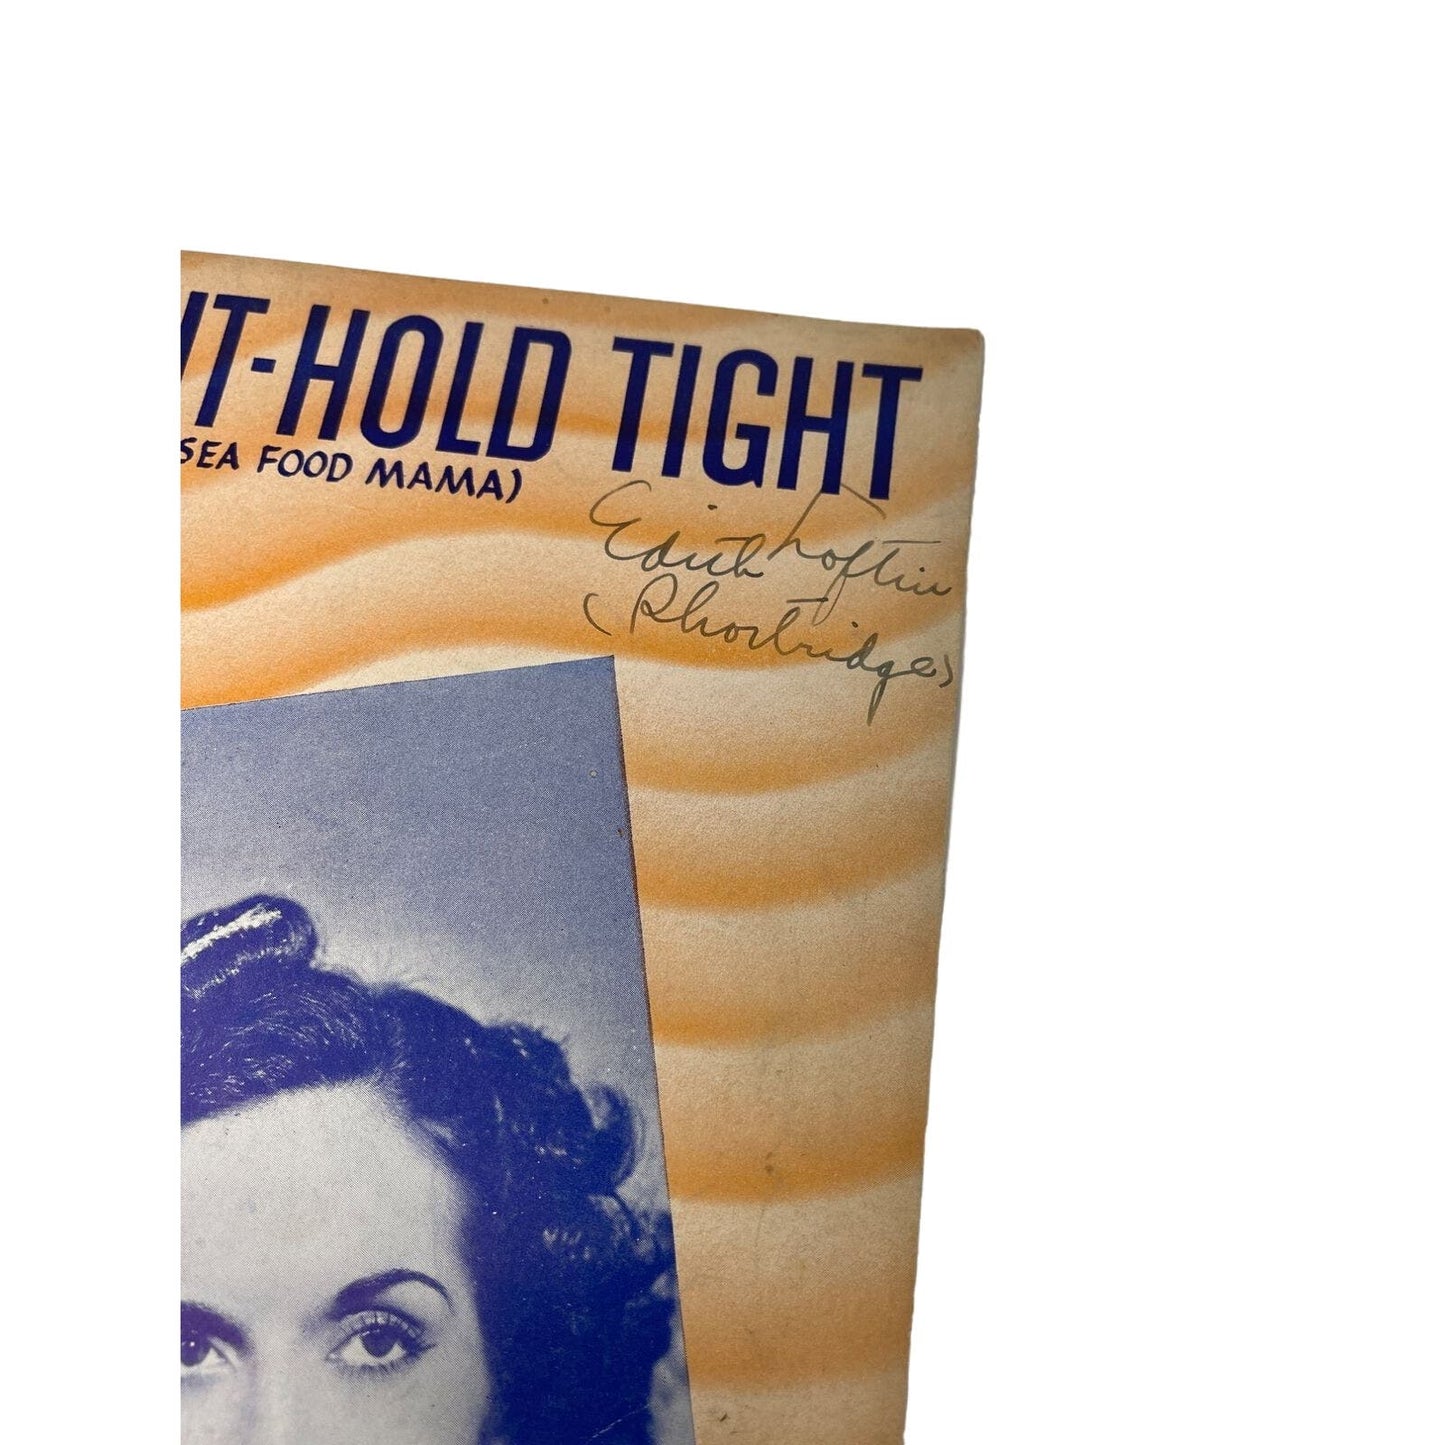 1939 Hold Tight Hold Tight Sheet Music Piano Andrew Sisters